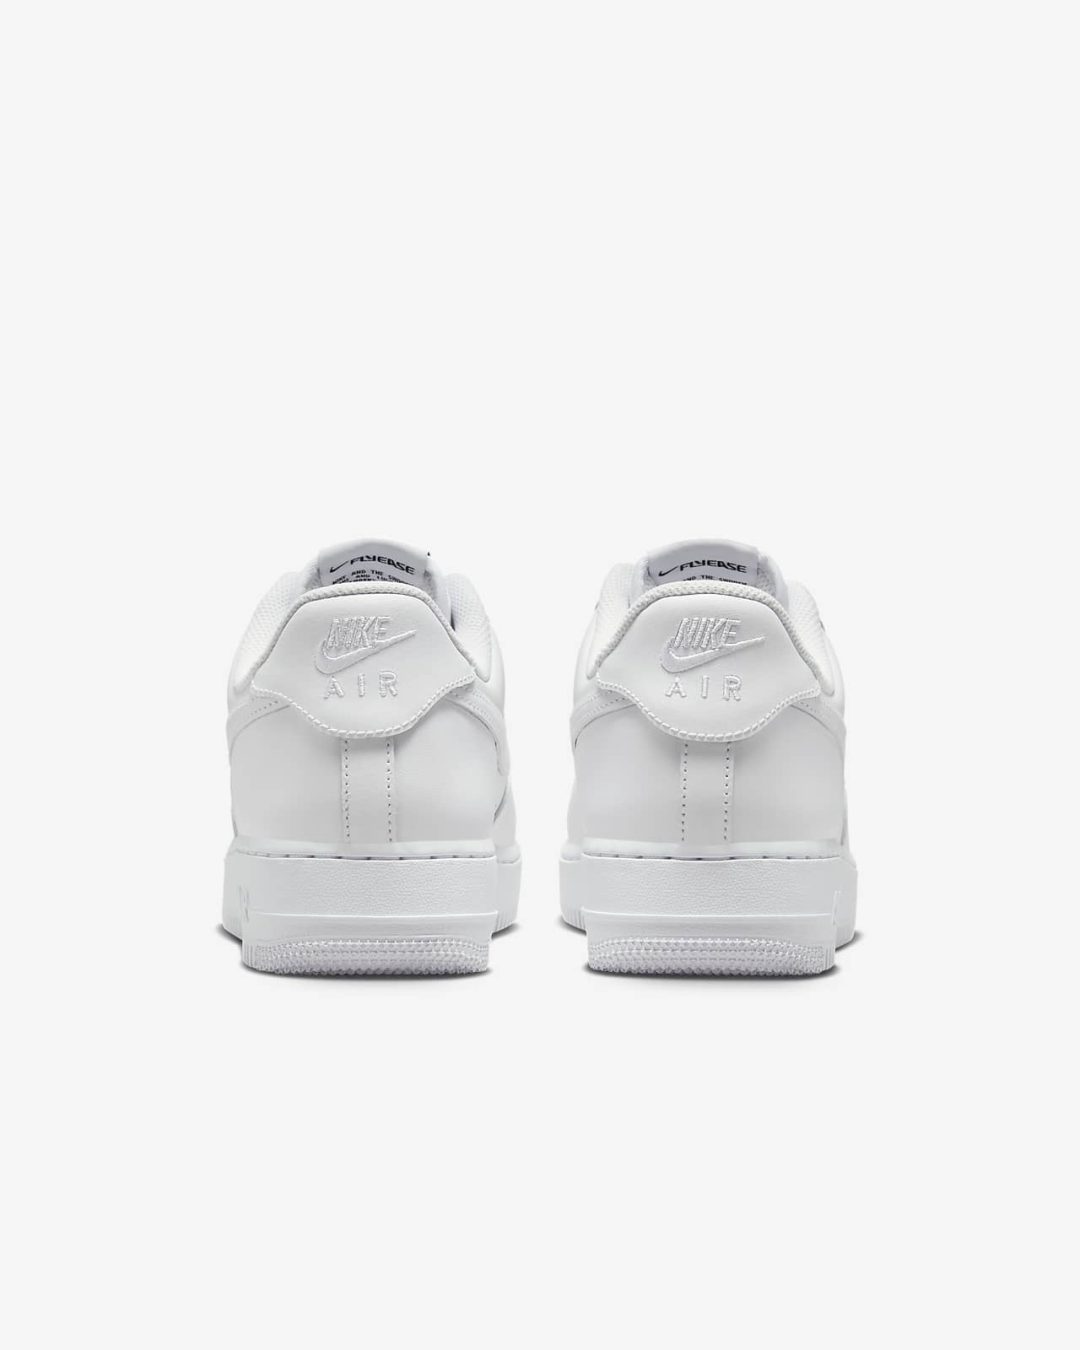 nike-air-force-1-low-flyease-white-fd1146-100-release-20230518